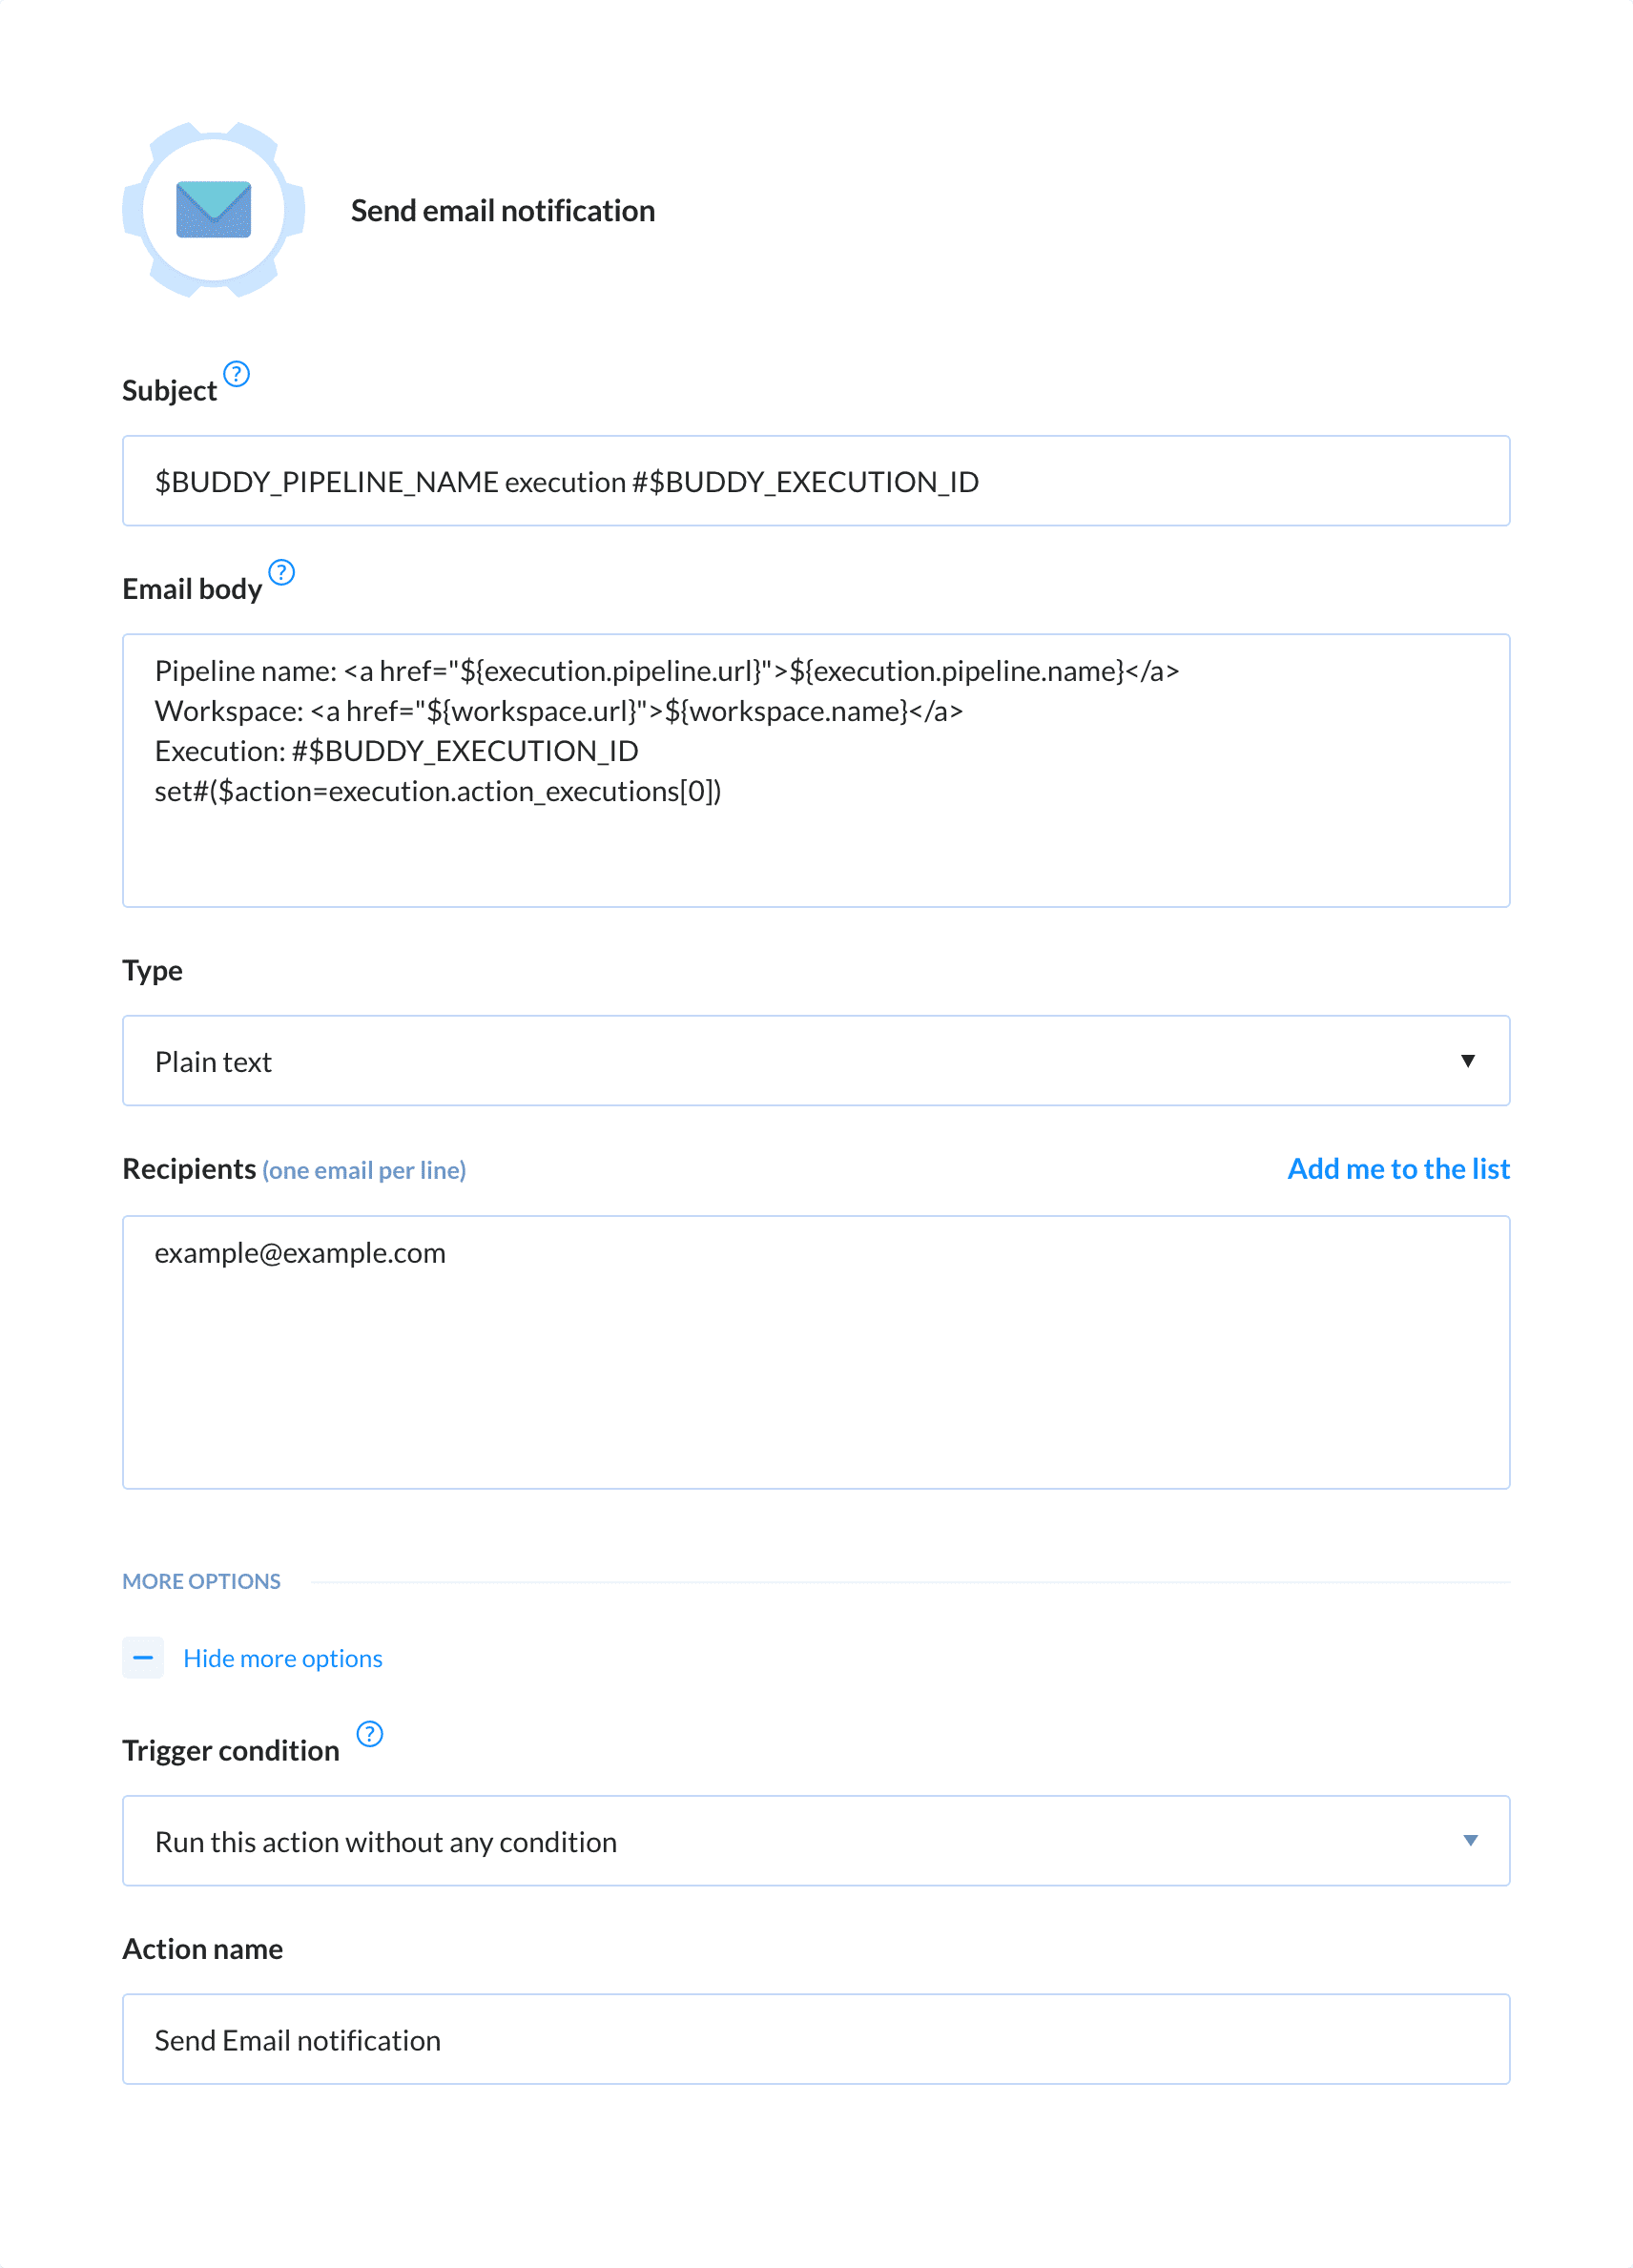 Preview Email action